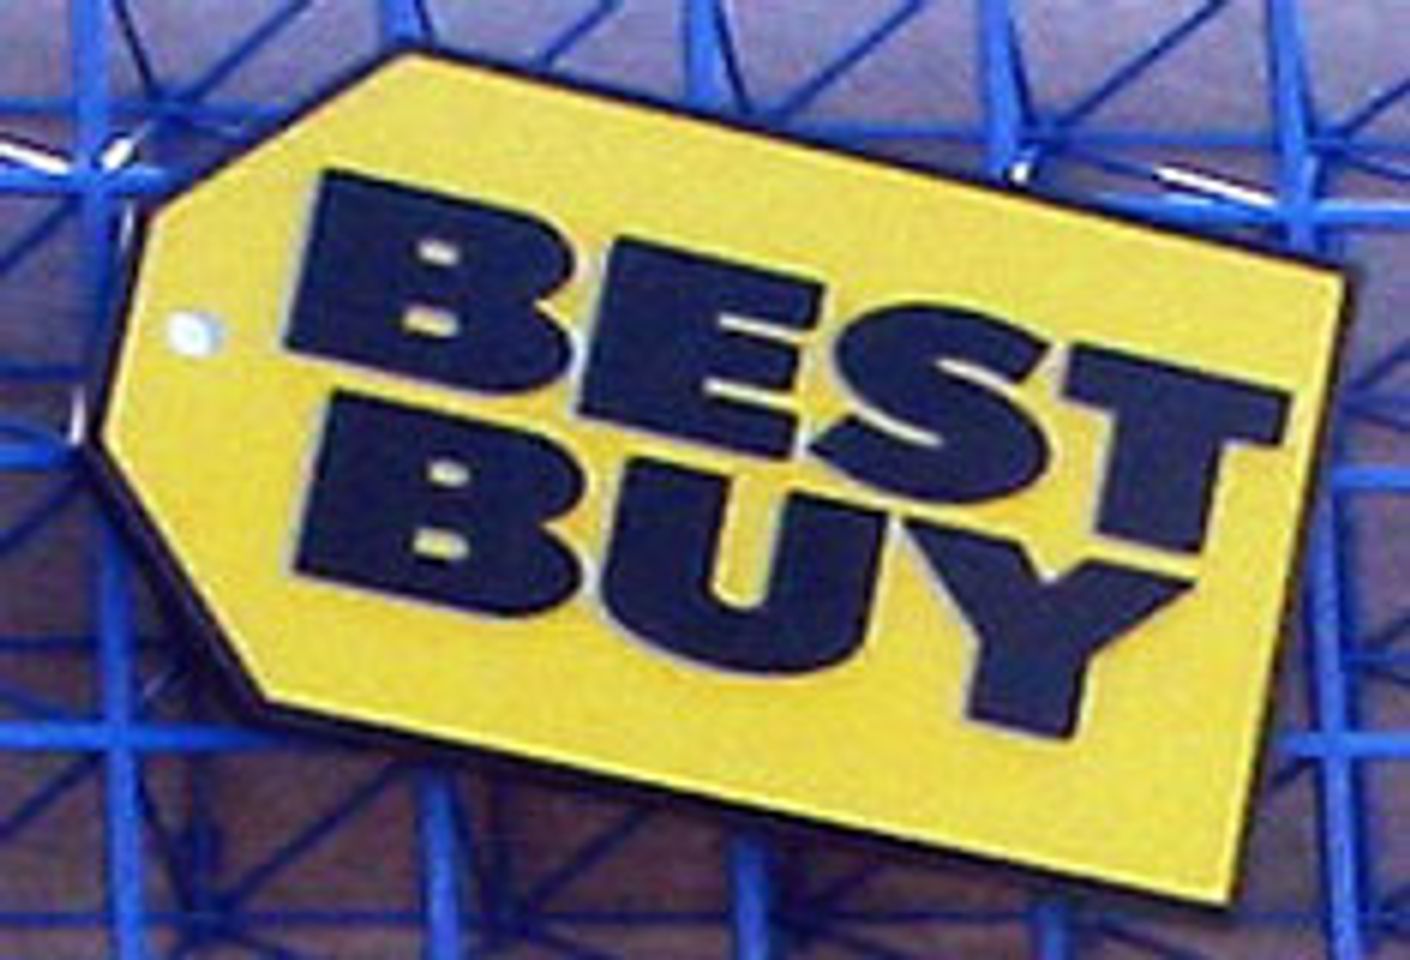 Feds Stopped E-Mail Extortion Plot Against Best Buy